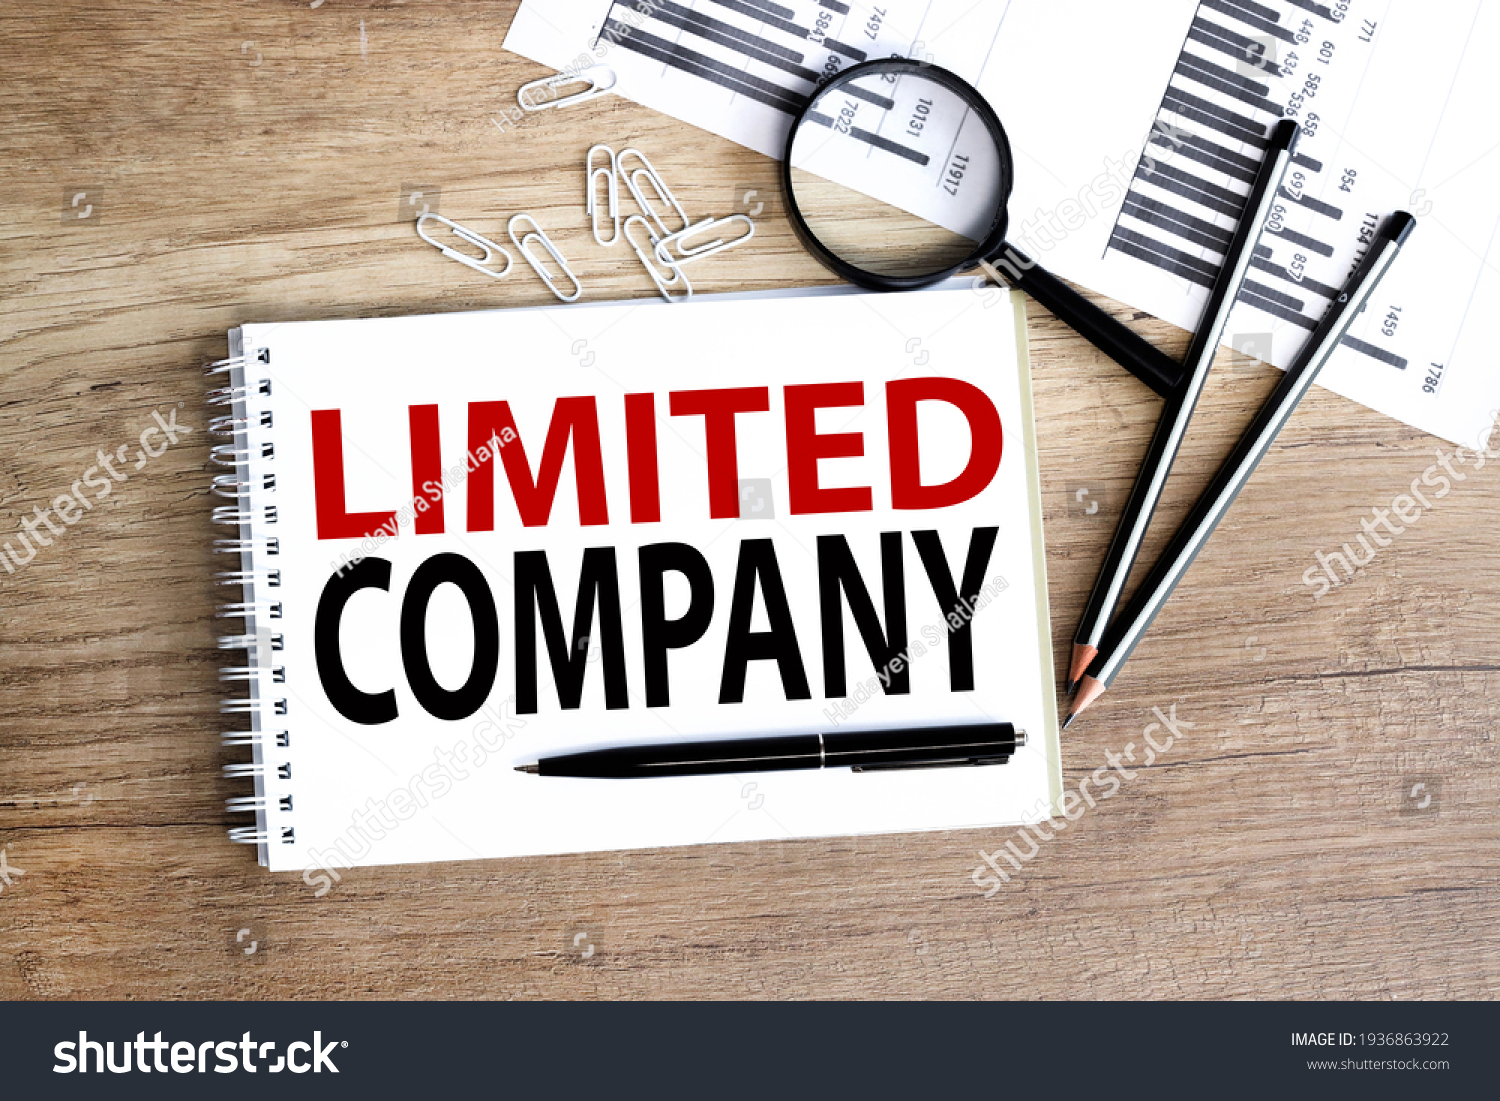 Limited company. text on white paper on wood background #1936863922